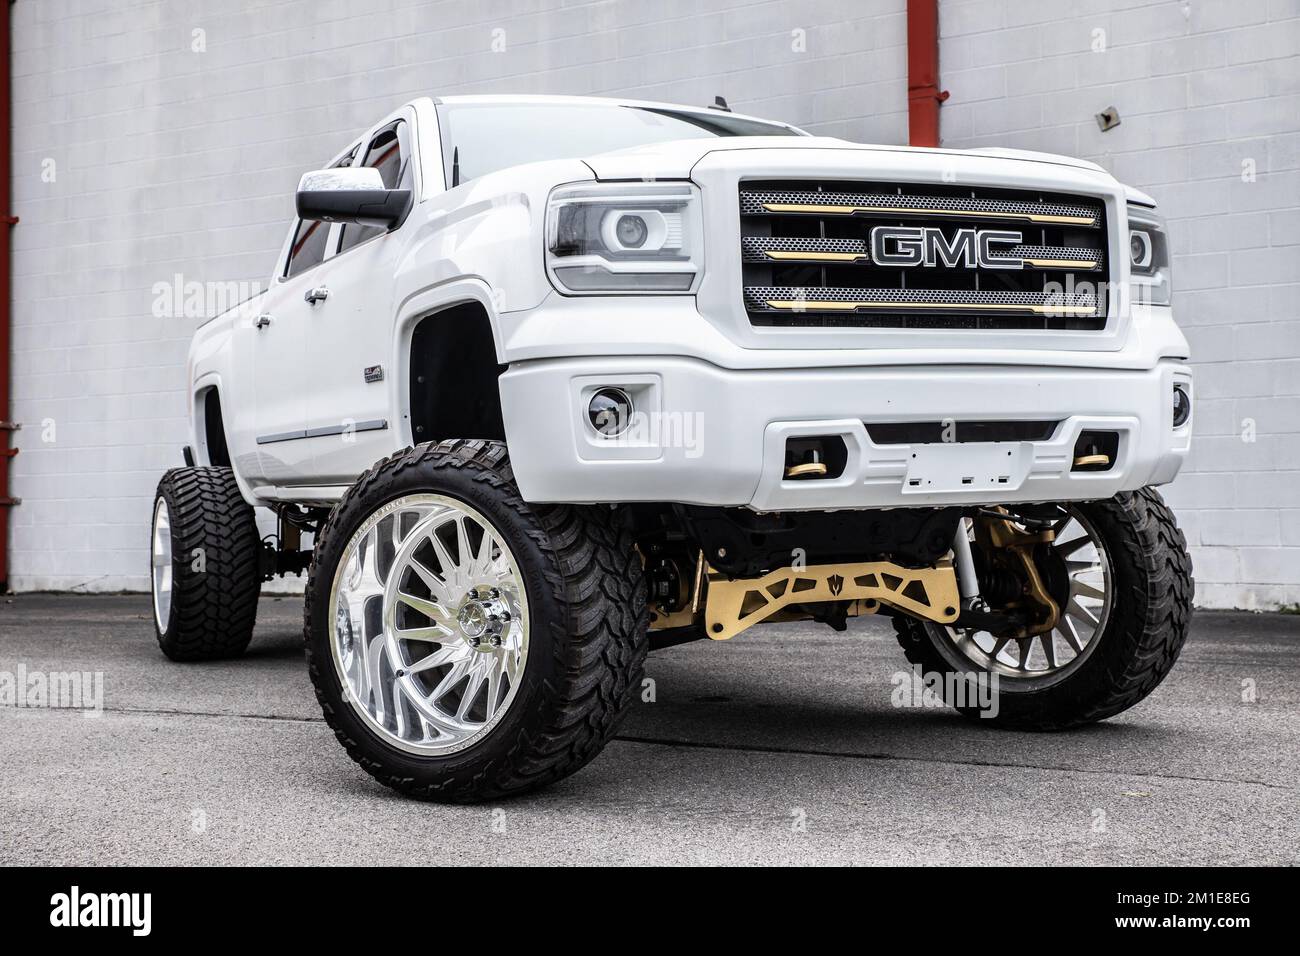 A white lifted GMC truck parked outdoors Stock Photo